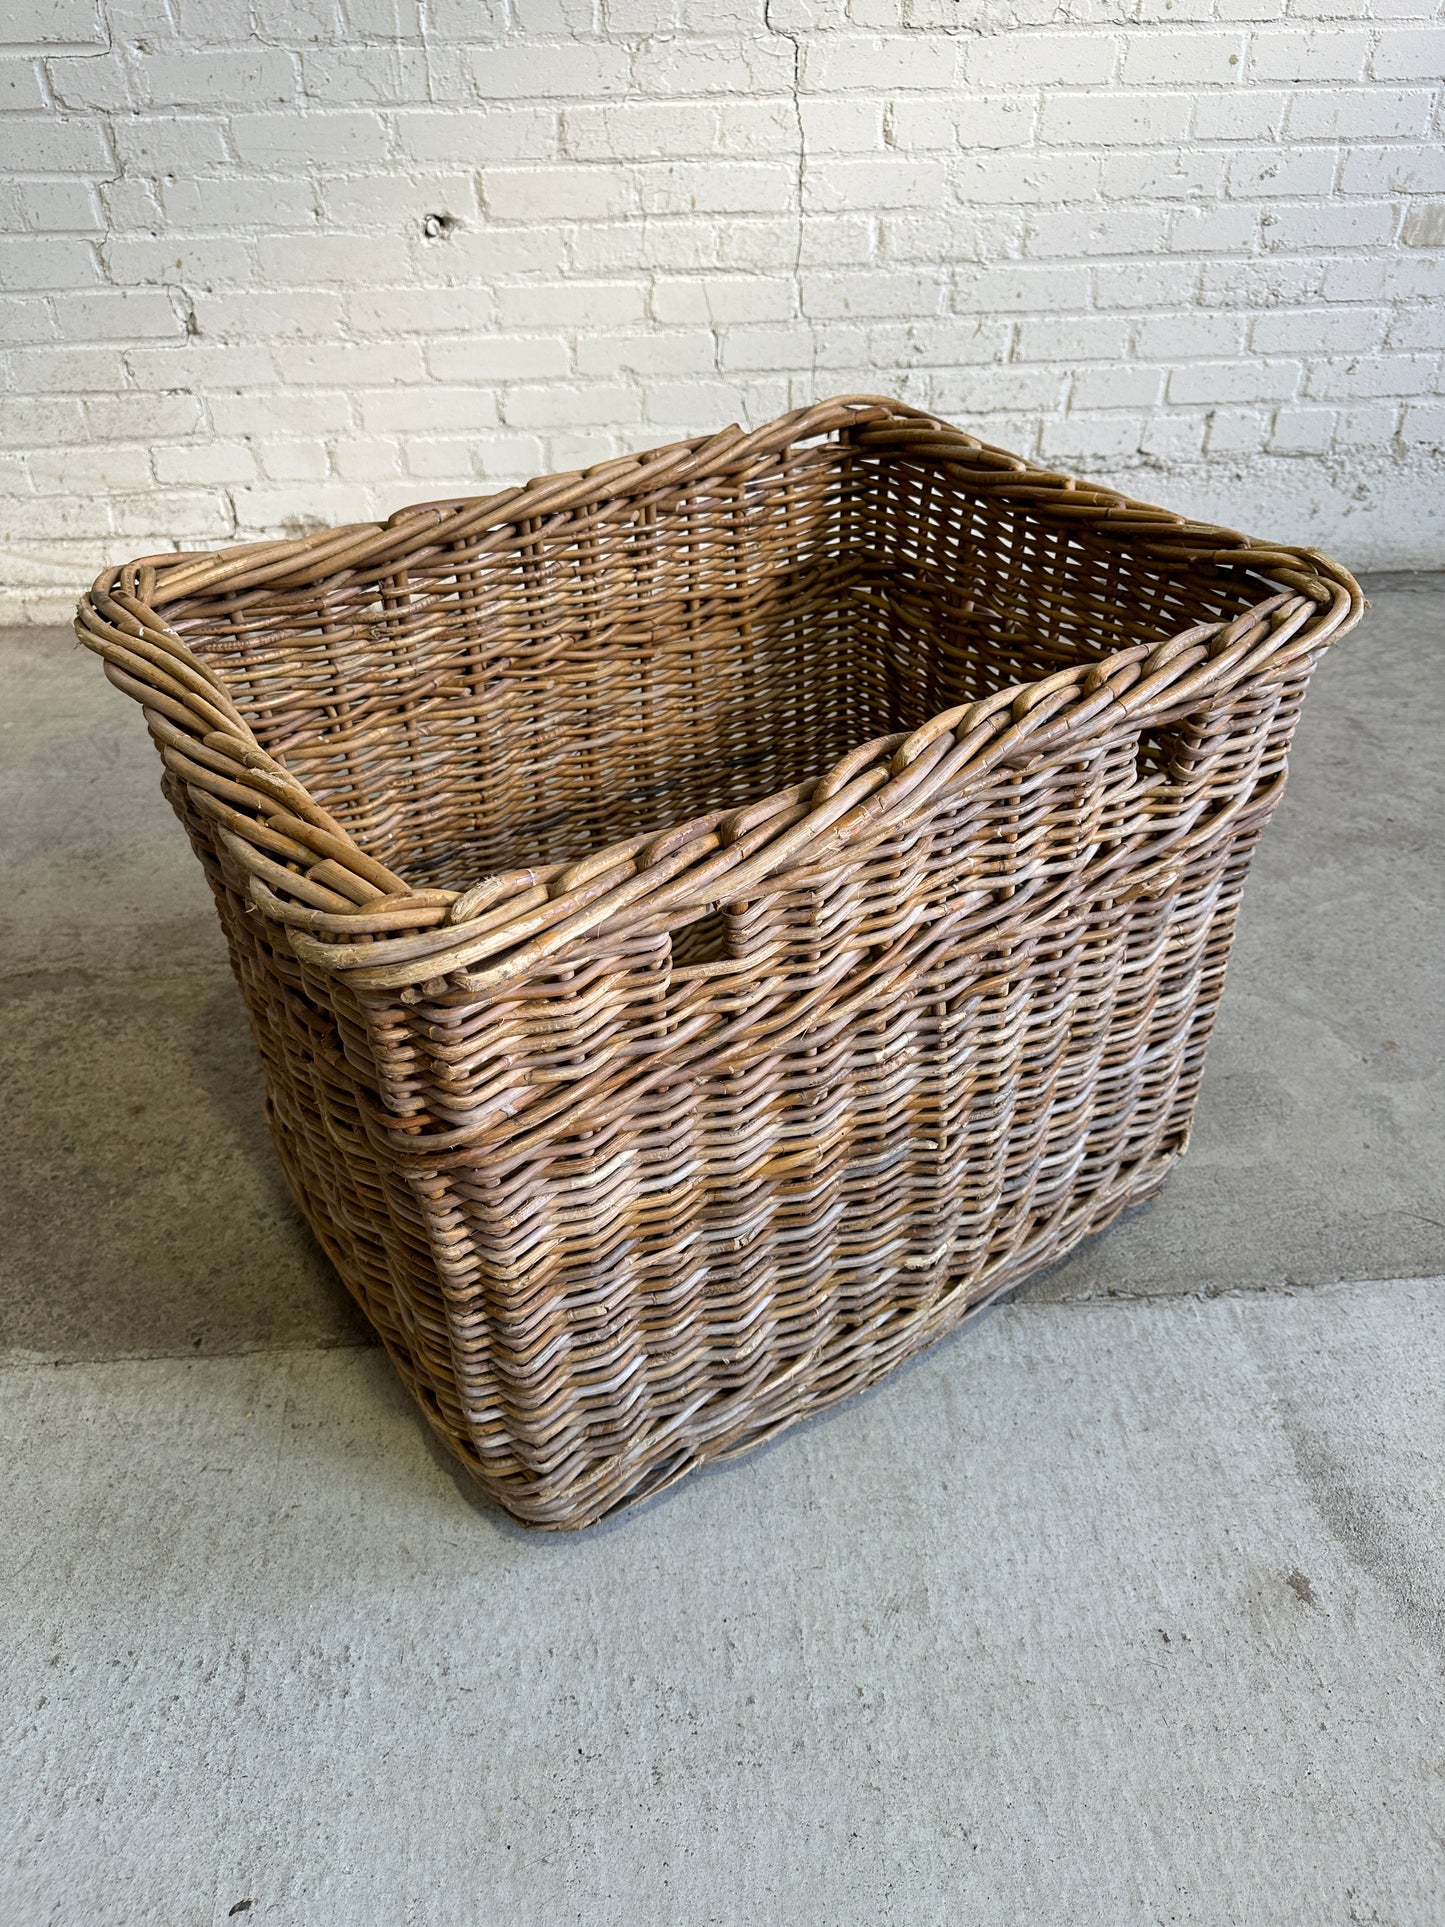 A Large Antique Wicker Mill Basket c. 1910